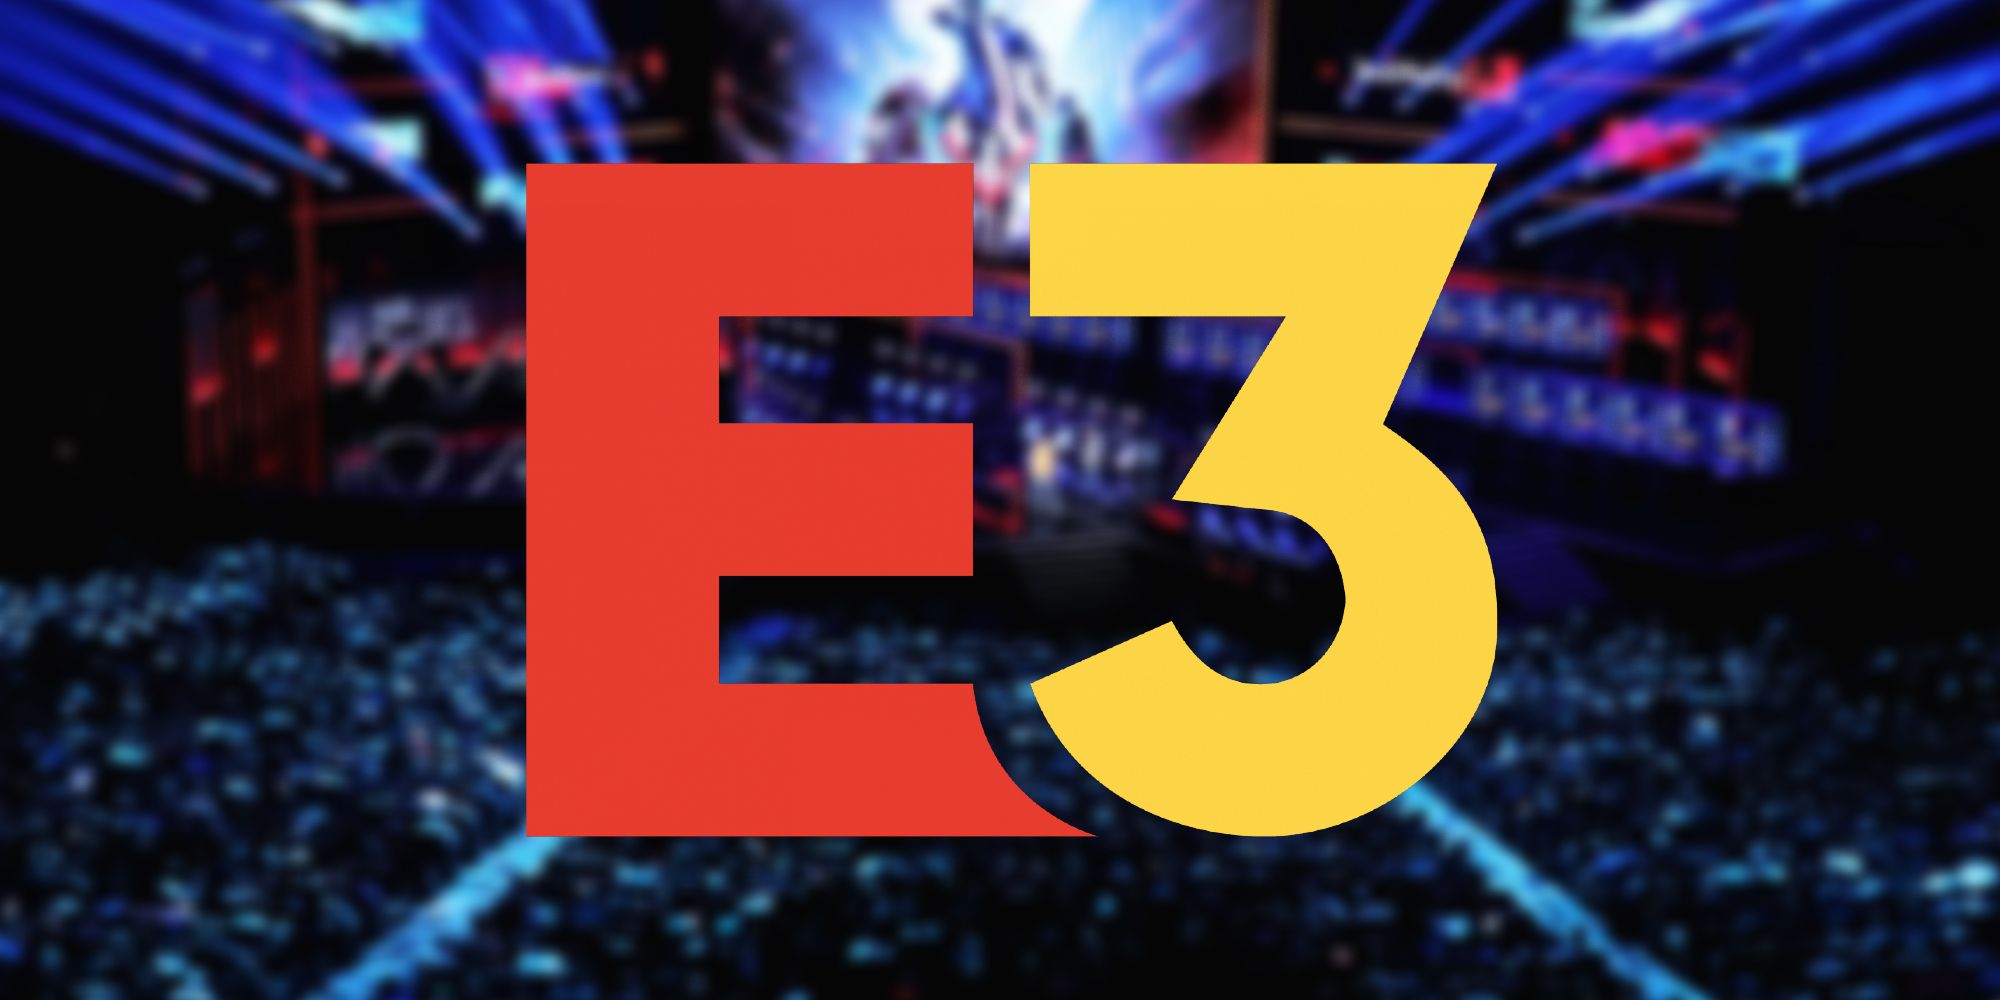 E3 being canceled in 2022 leaves a void that can't be filled by other industry presentations like Summer Game Fest and the Xbox/Bethesda showcase